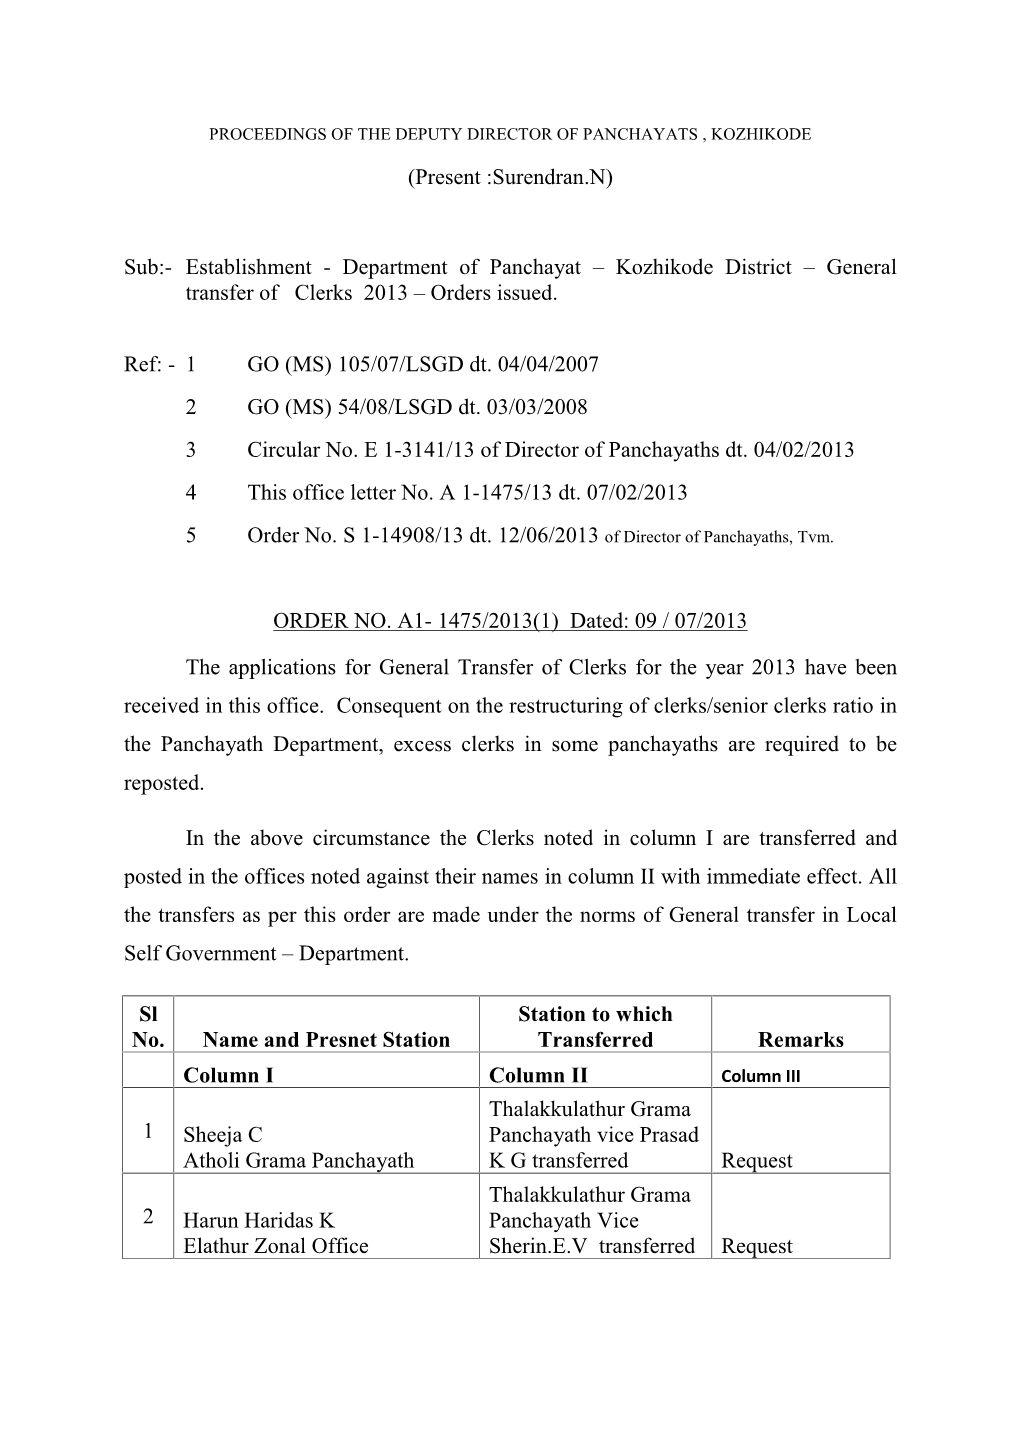 Kozhikode District – General Transfer of Clerks 2013 – Orders Issued